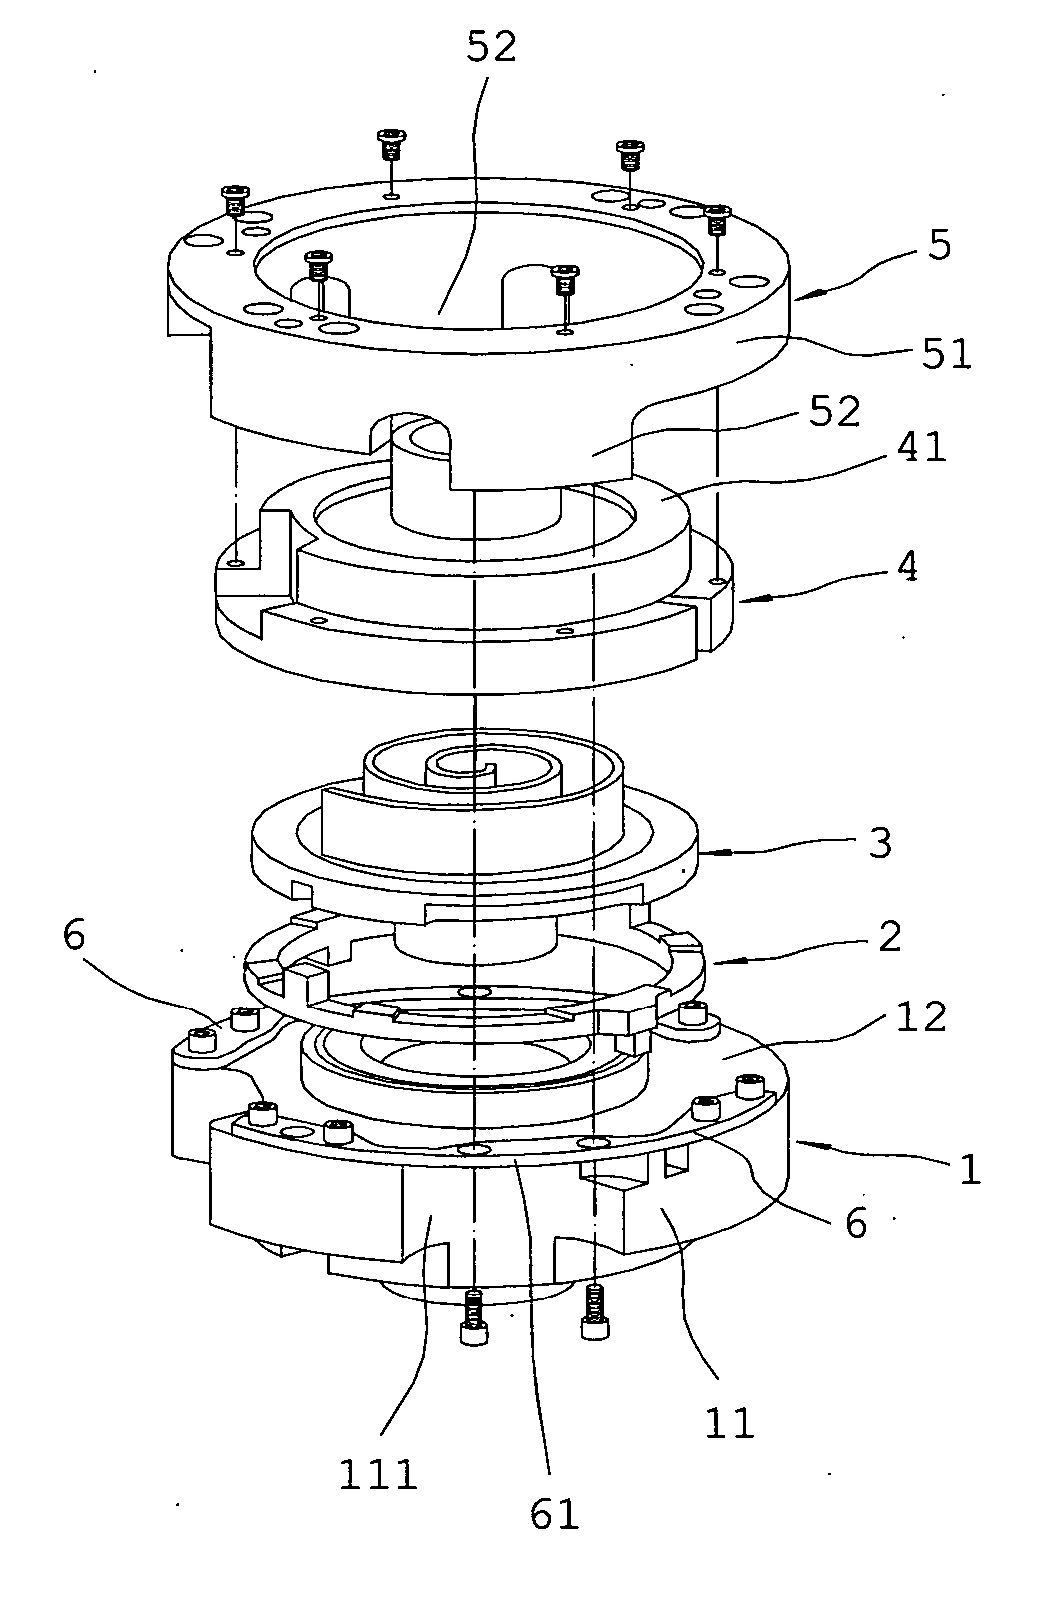 Scroll apparatus with an axial gap control function